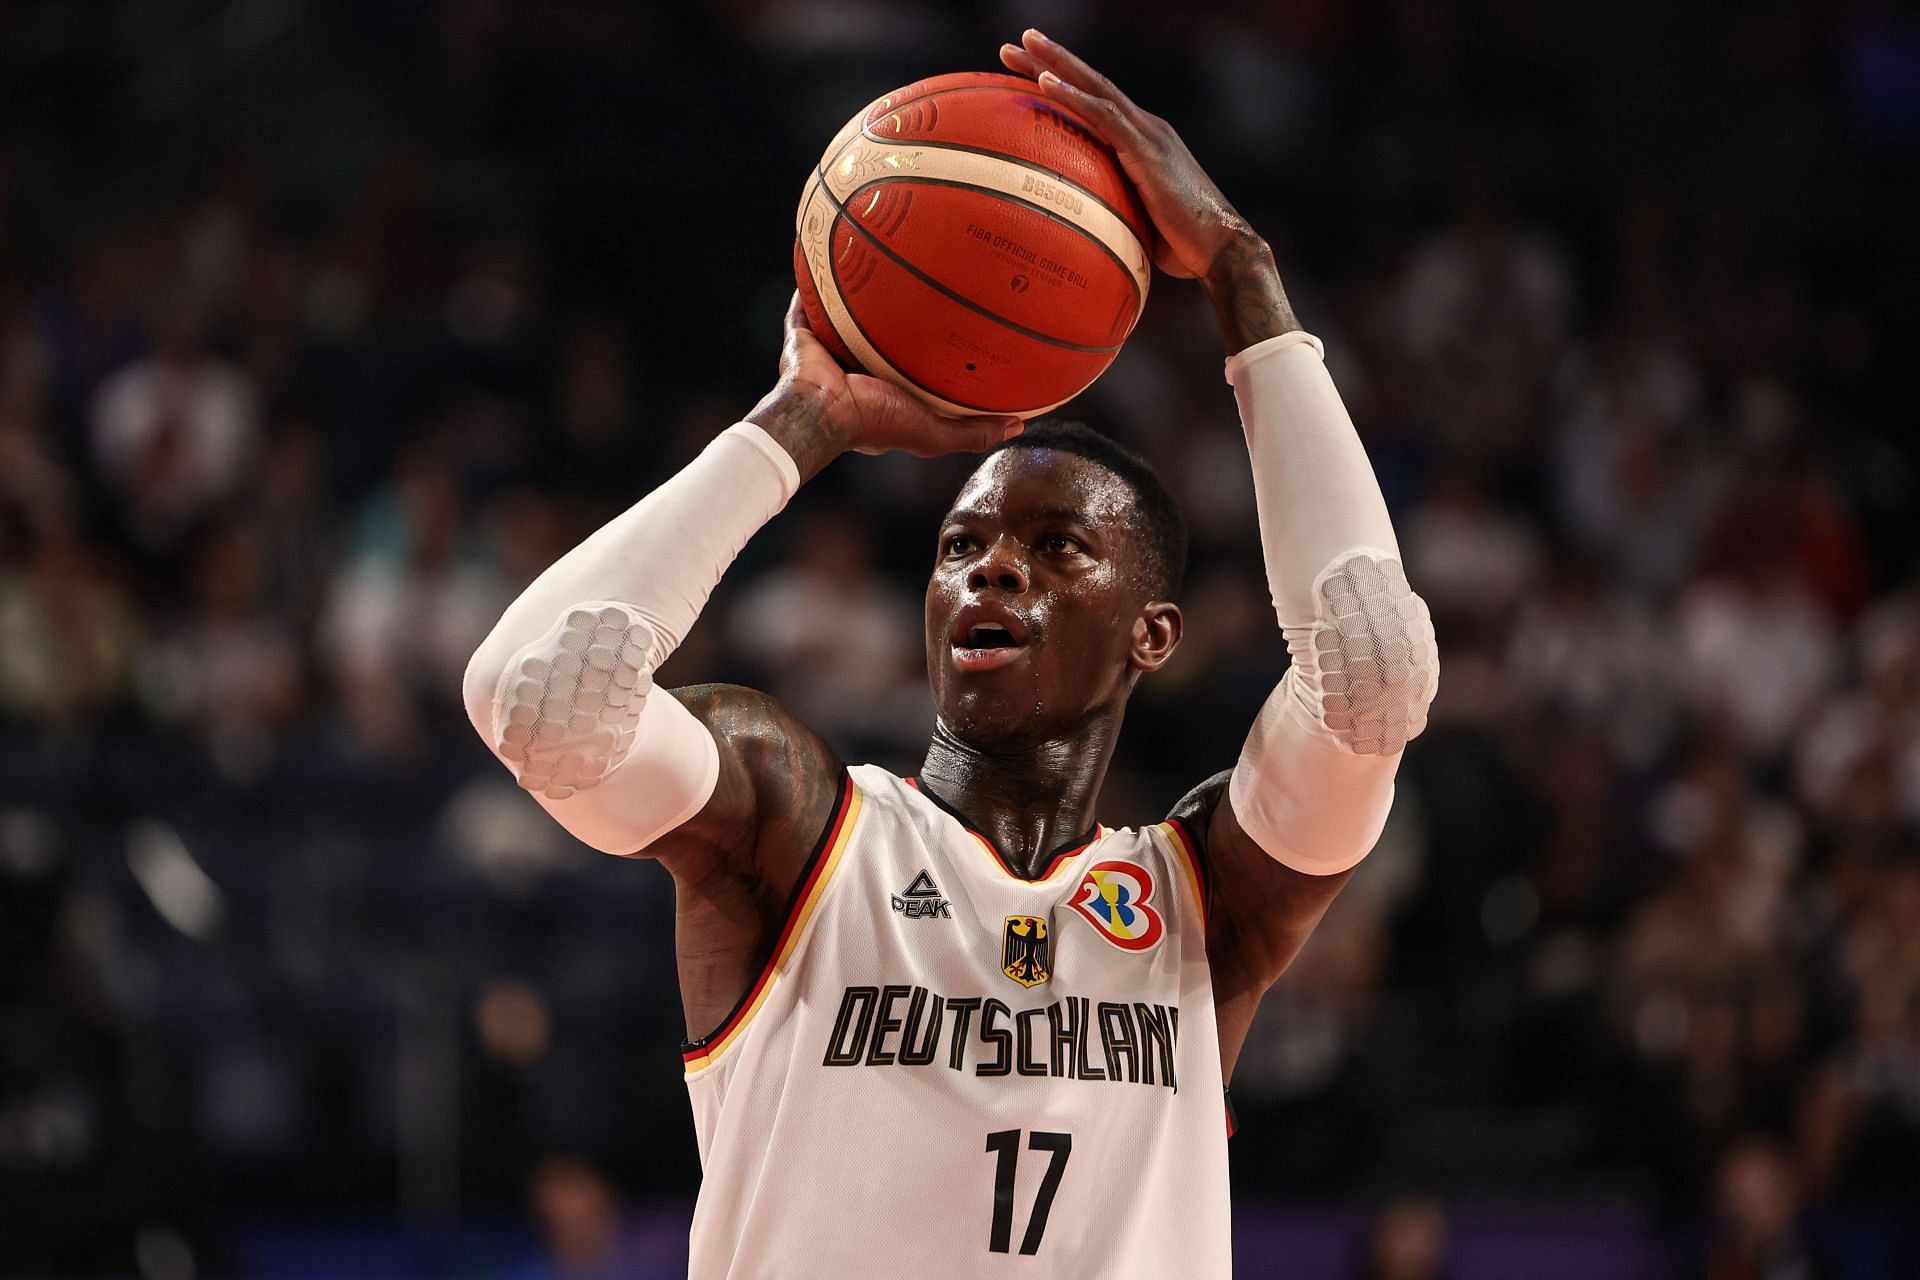 Despite big game from Schroder, Spain ousts Germany from EuroBasket